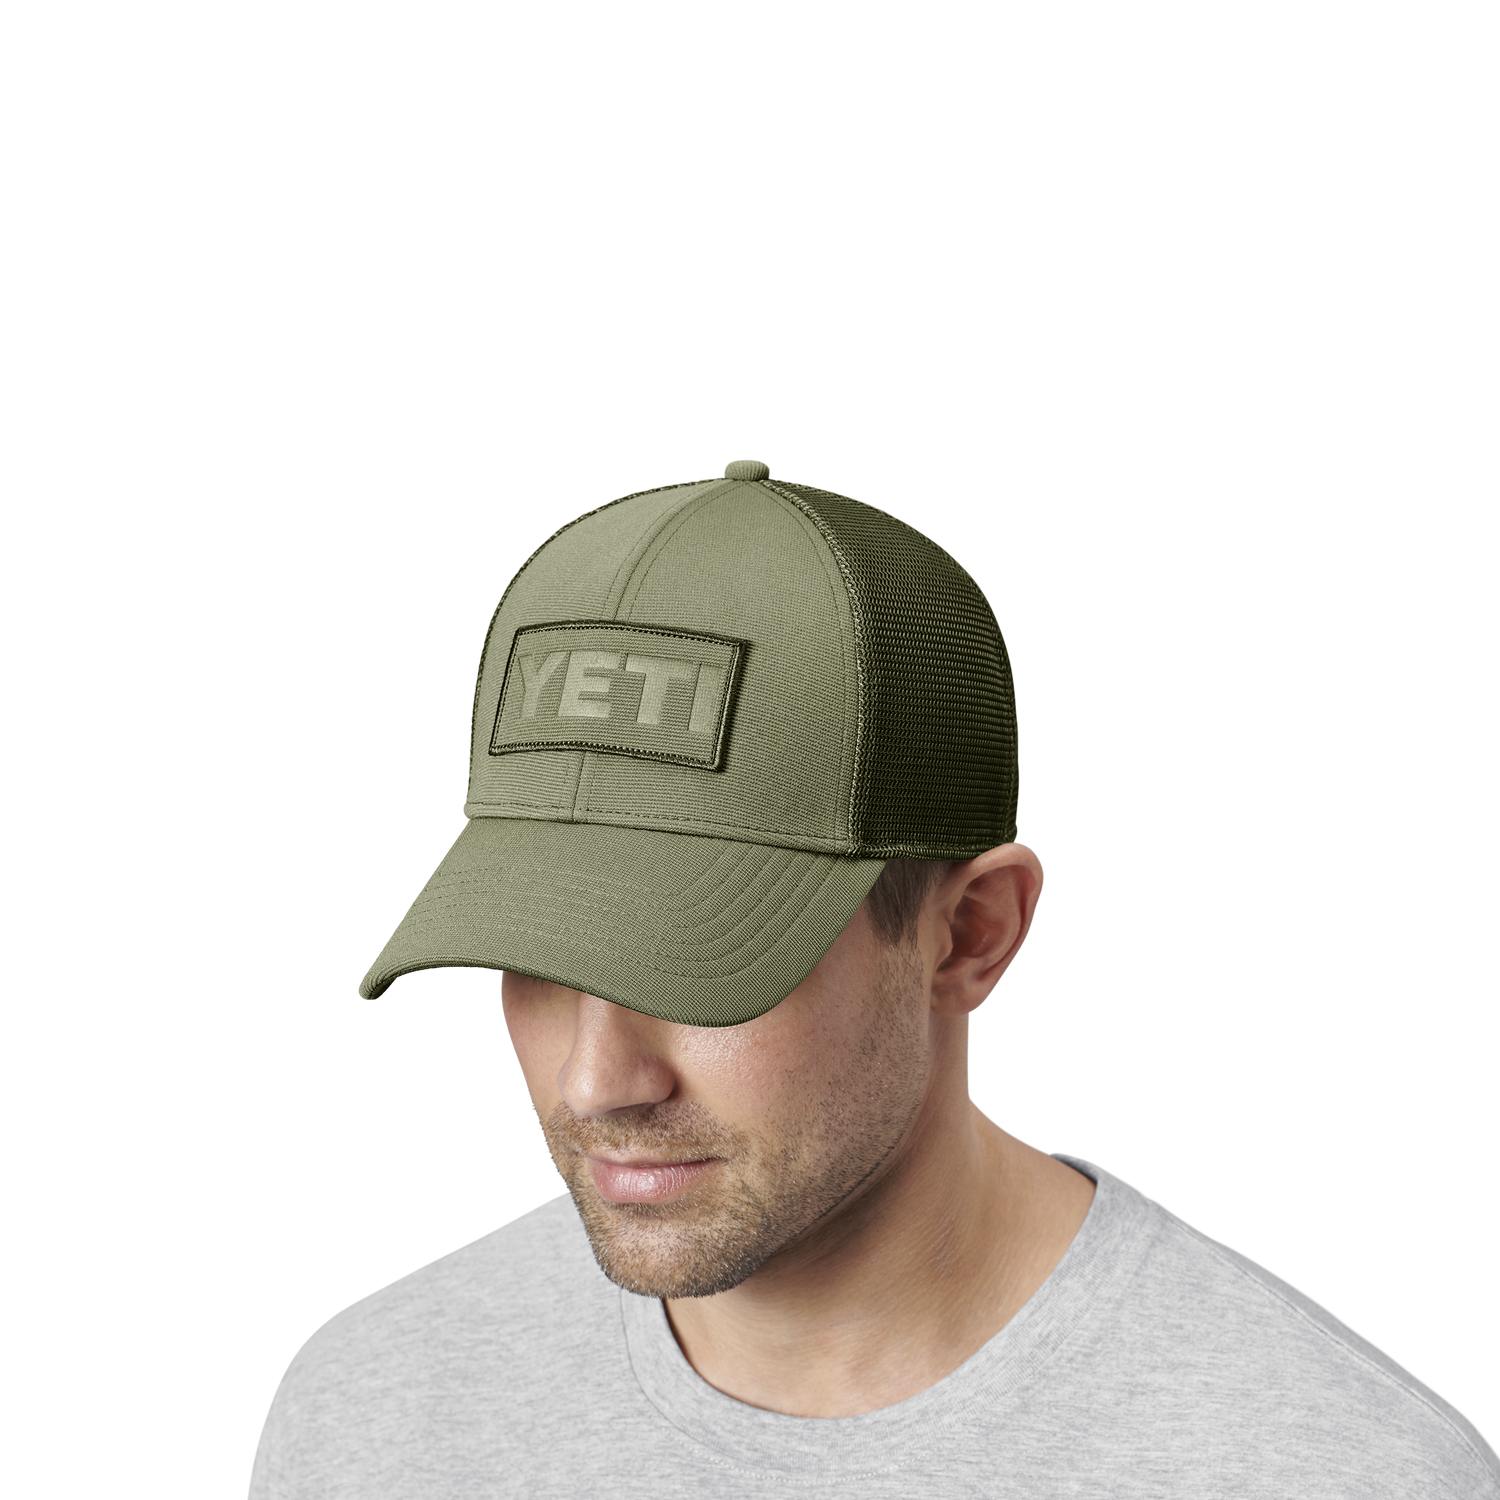 YETI Core Patch Trucker Hat Olive on Olive Olive/Olive